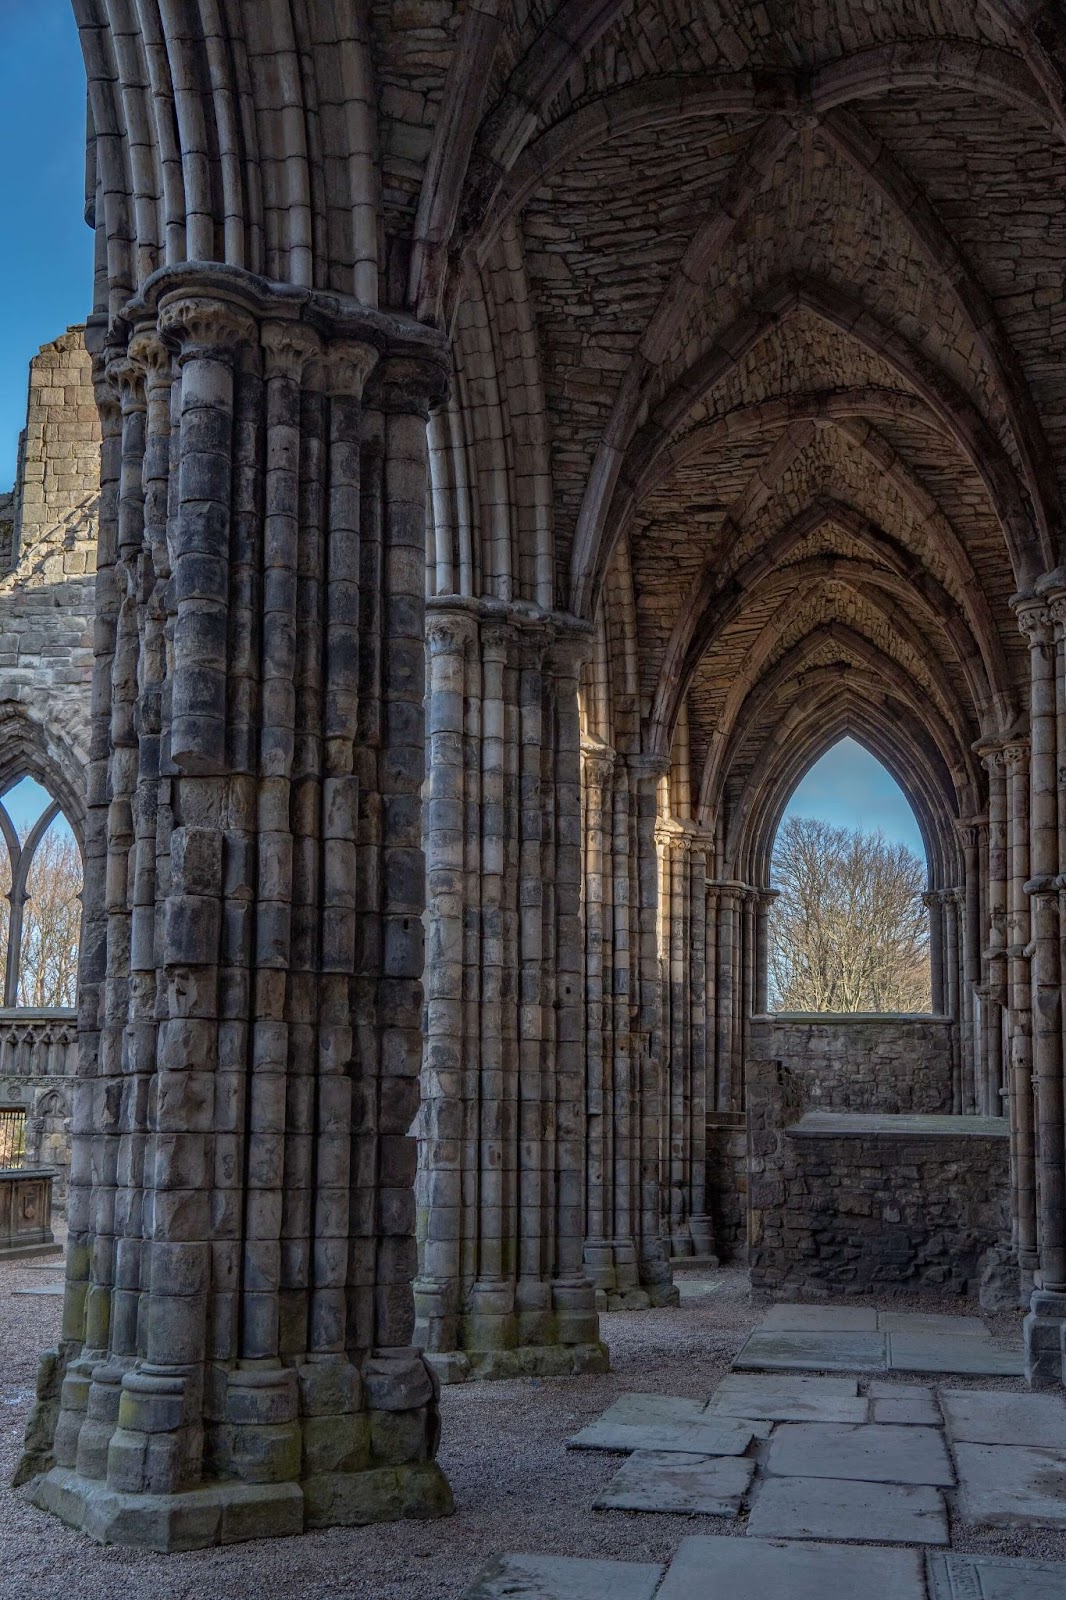 24 hours in Edinburgh. This is an image of the ruined Holyrood Abbey on the grounds of the Palace of Holyroodhouse.